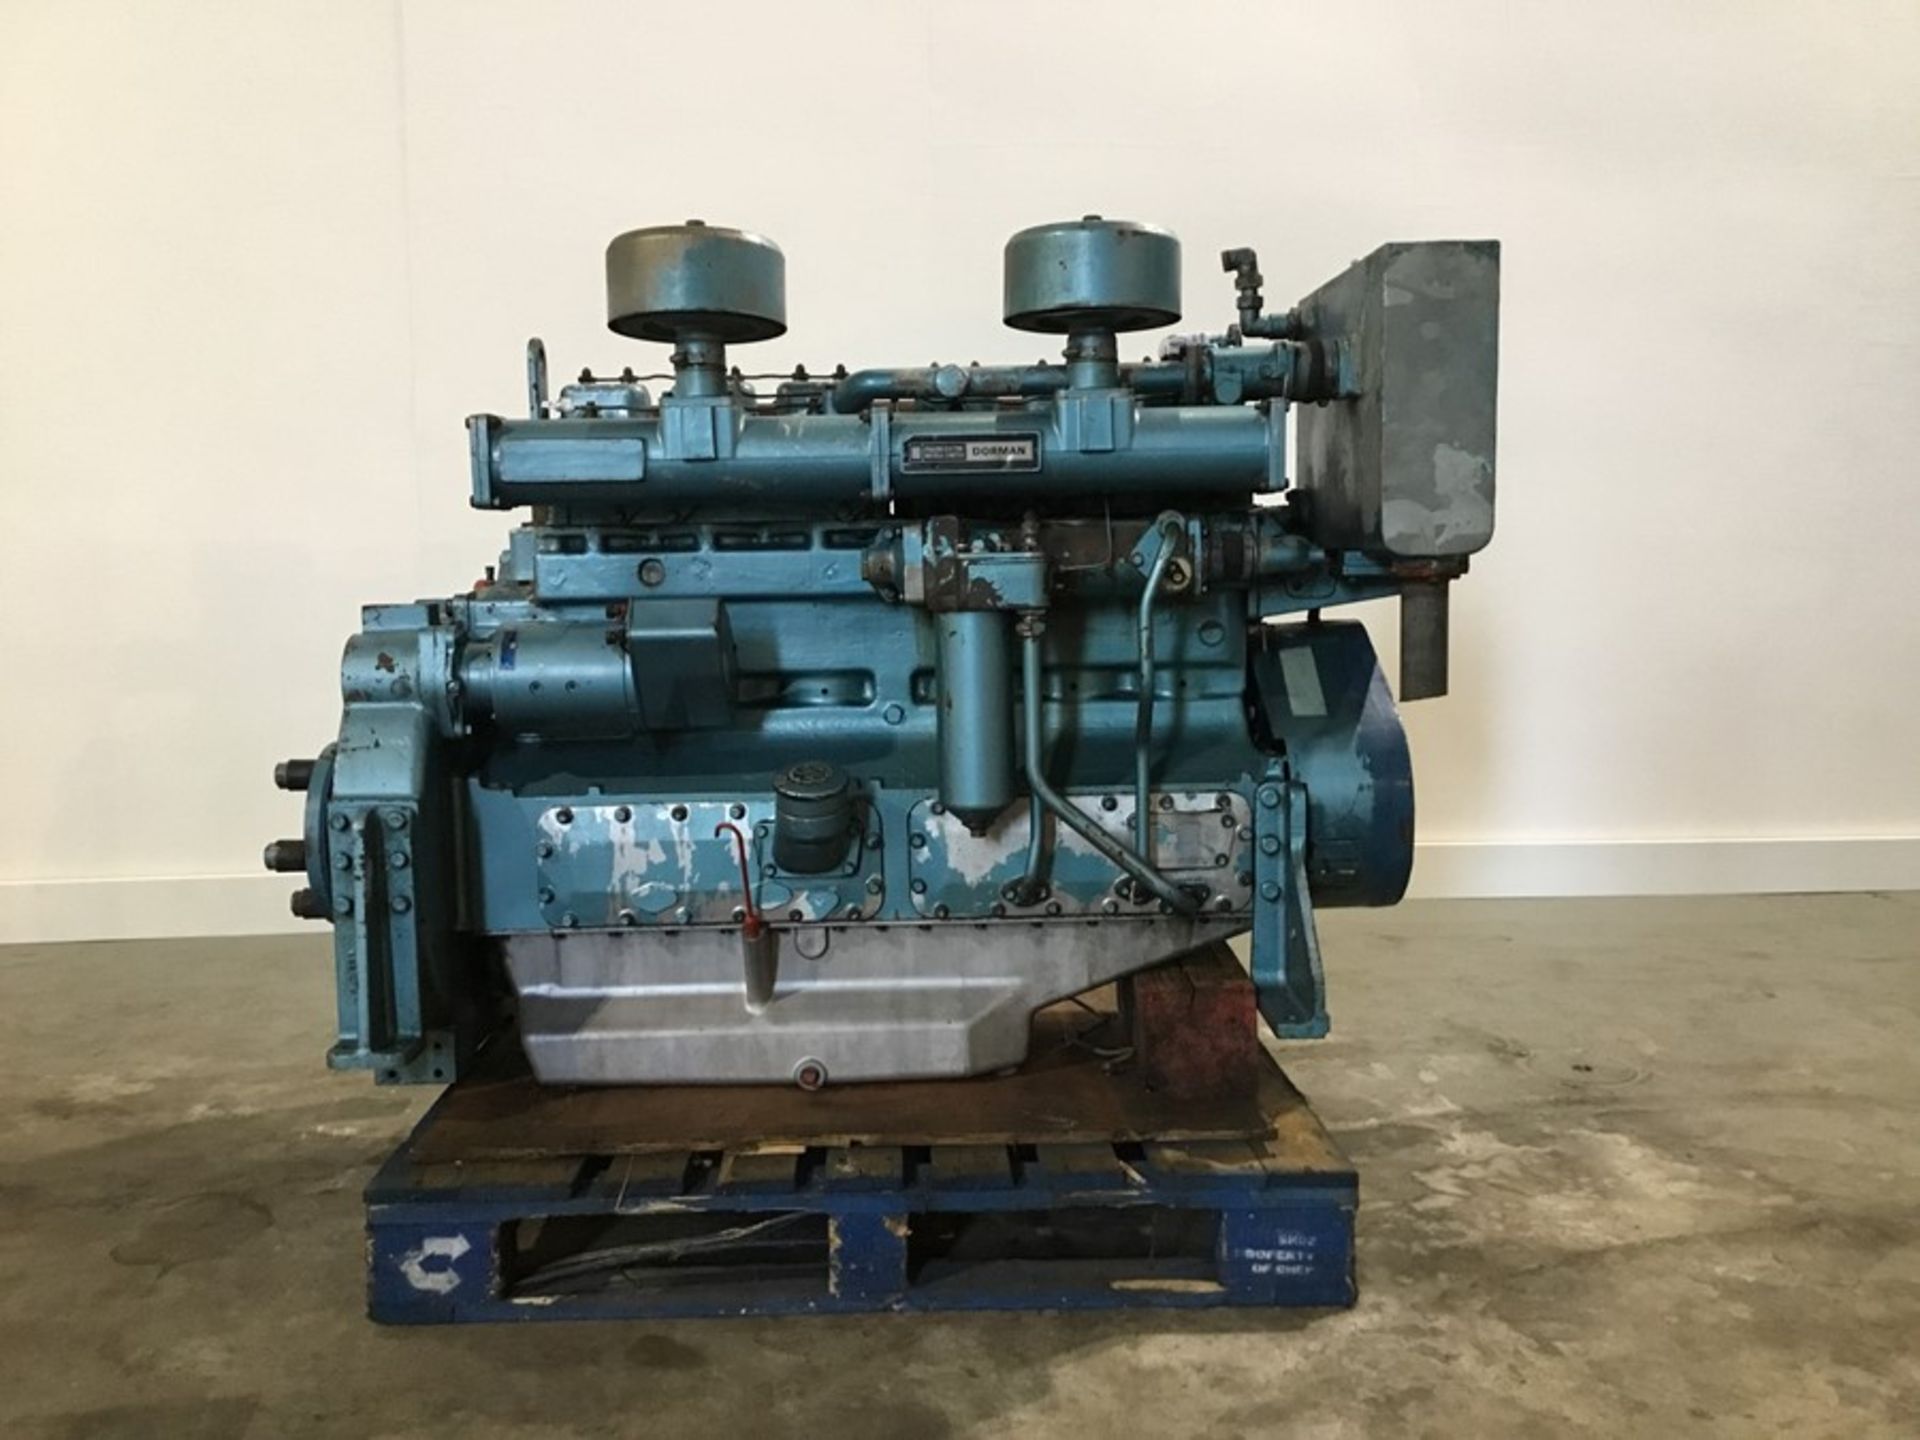 Dorman 6LE Diesel Engine: Dorman 6LE 6cyl Non turbo Serial number 100765 used - Image 7 of 15